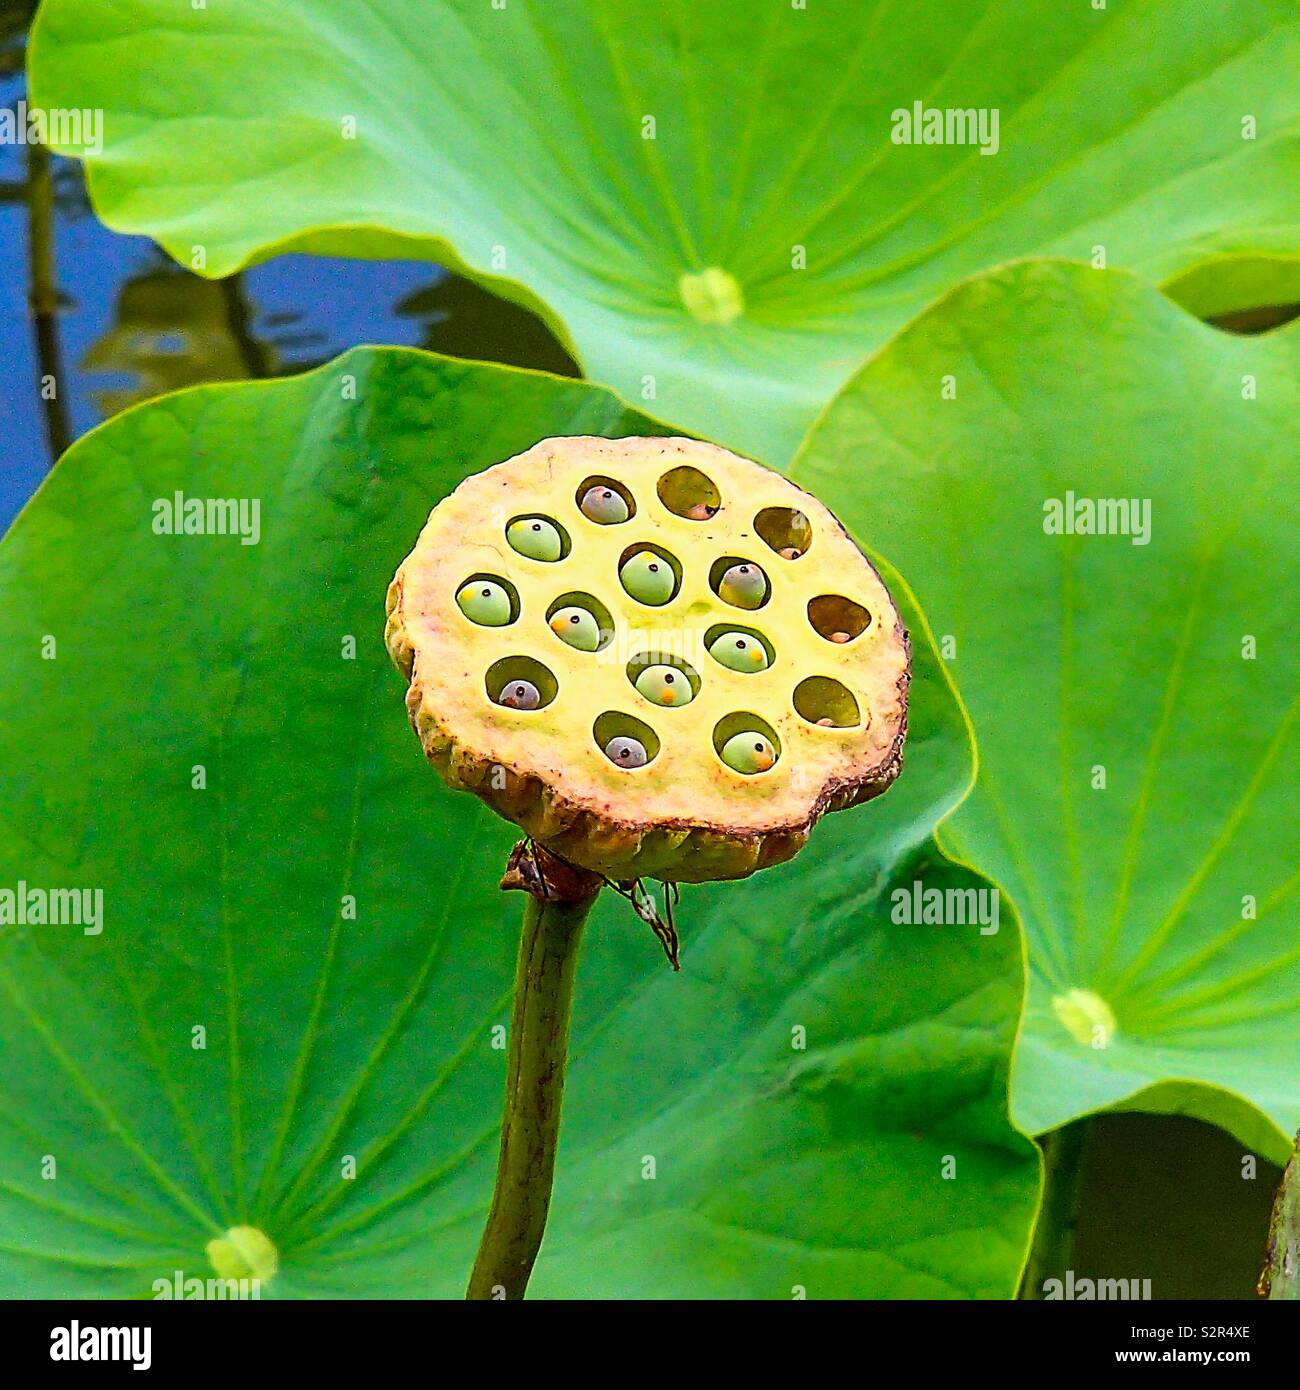 the fruits of the lotus flower Nelumbo, called nuts. In the background, the large green lotus leaves of the aquatic plant Stock Photo